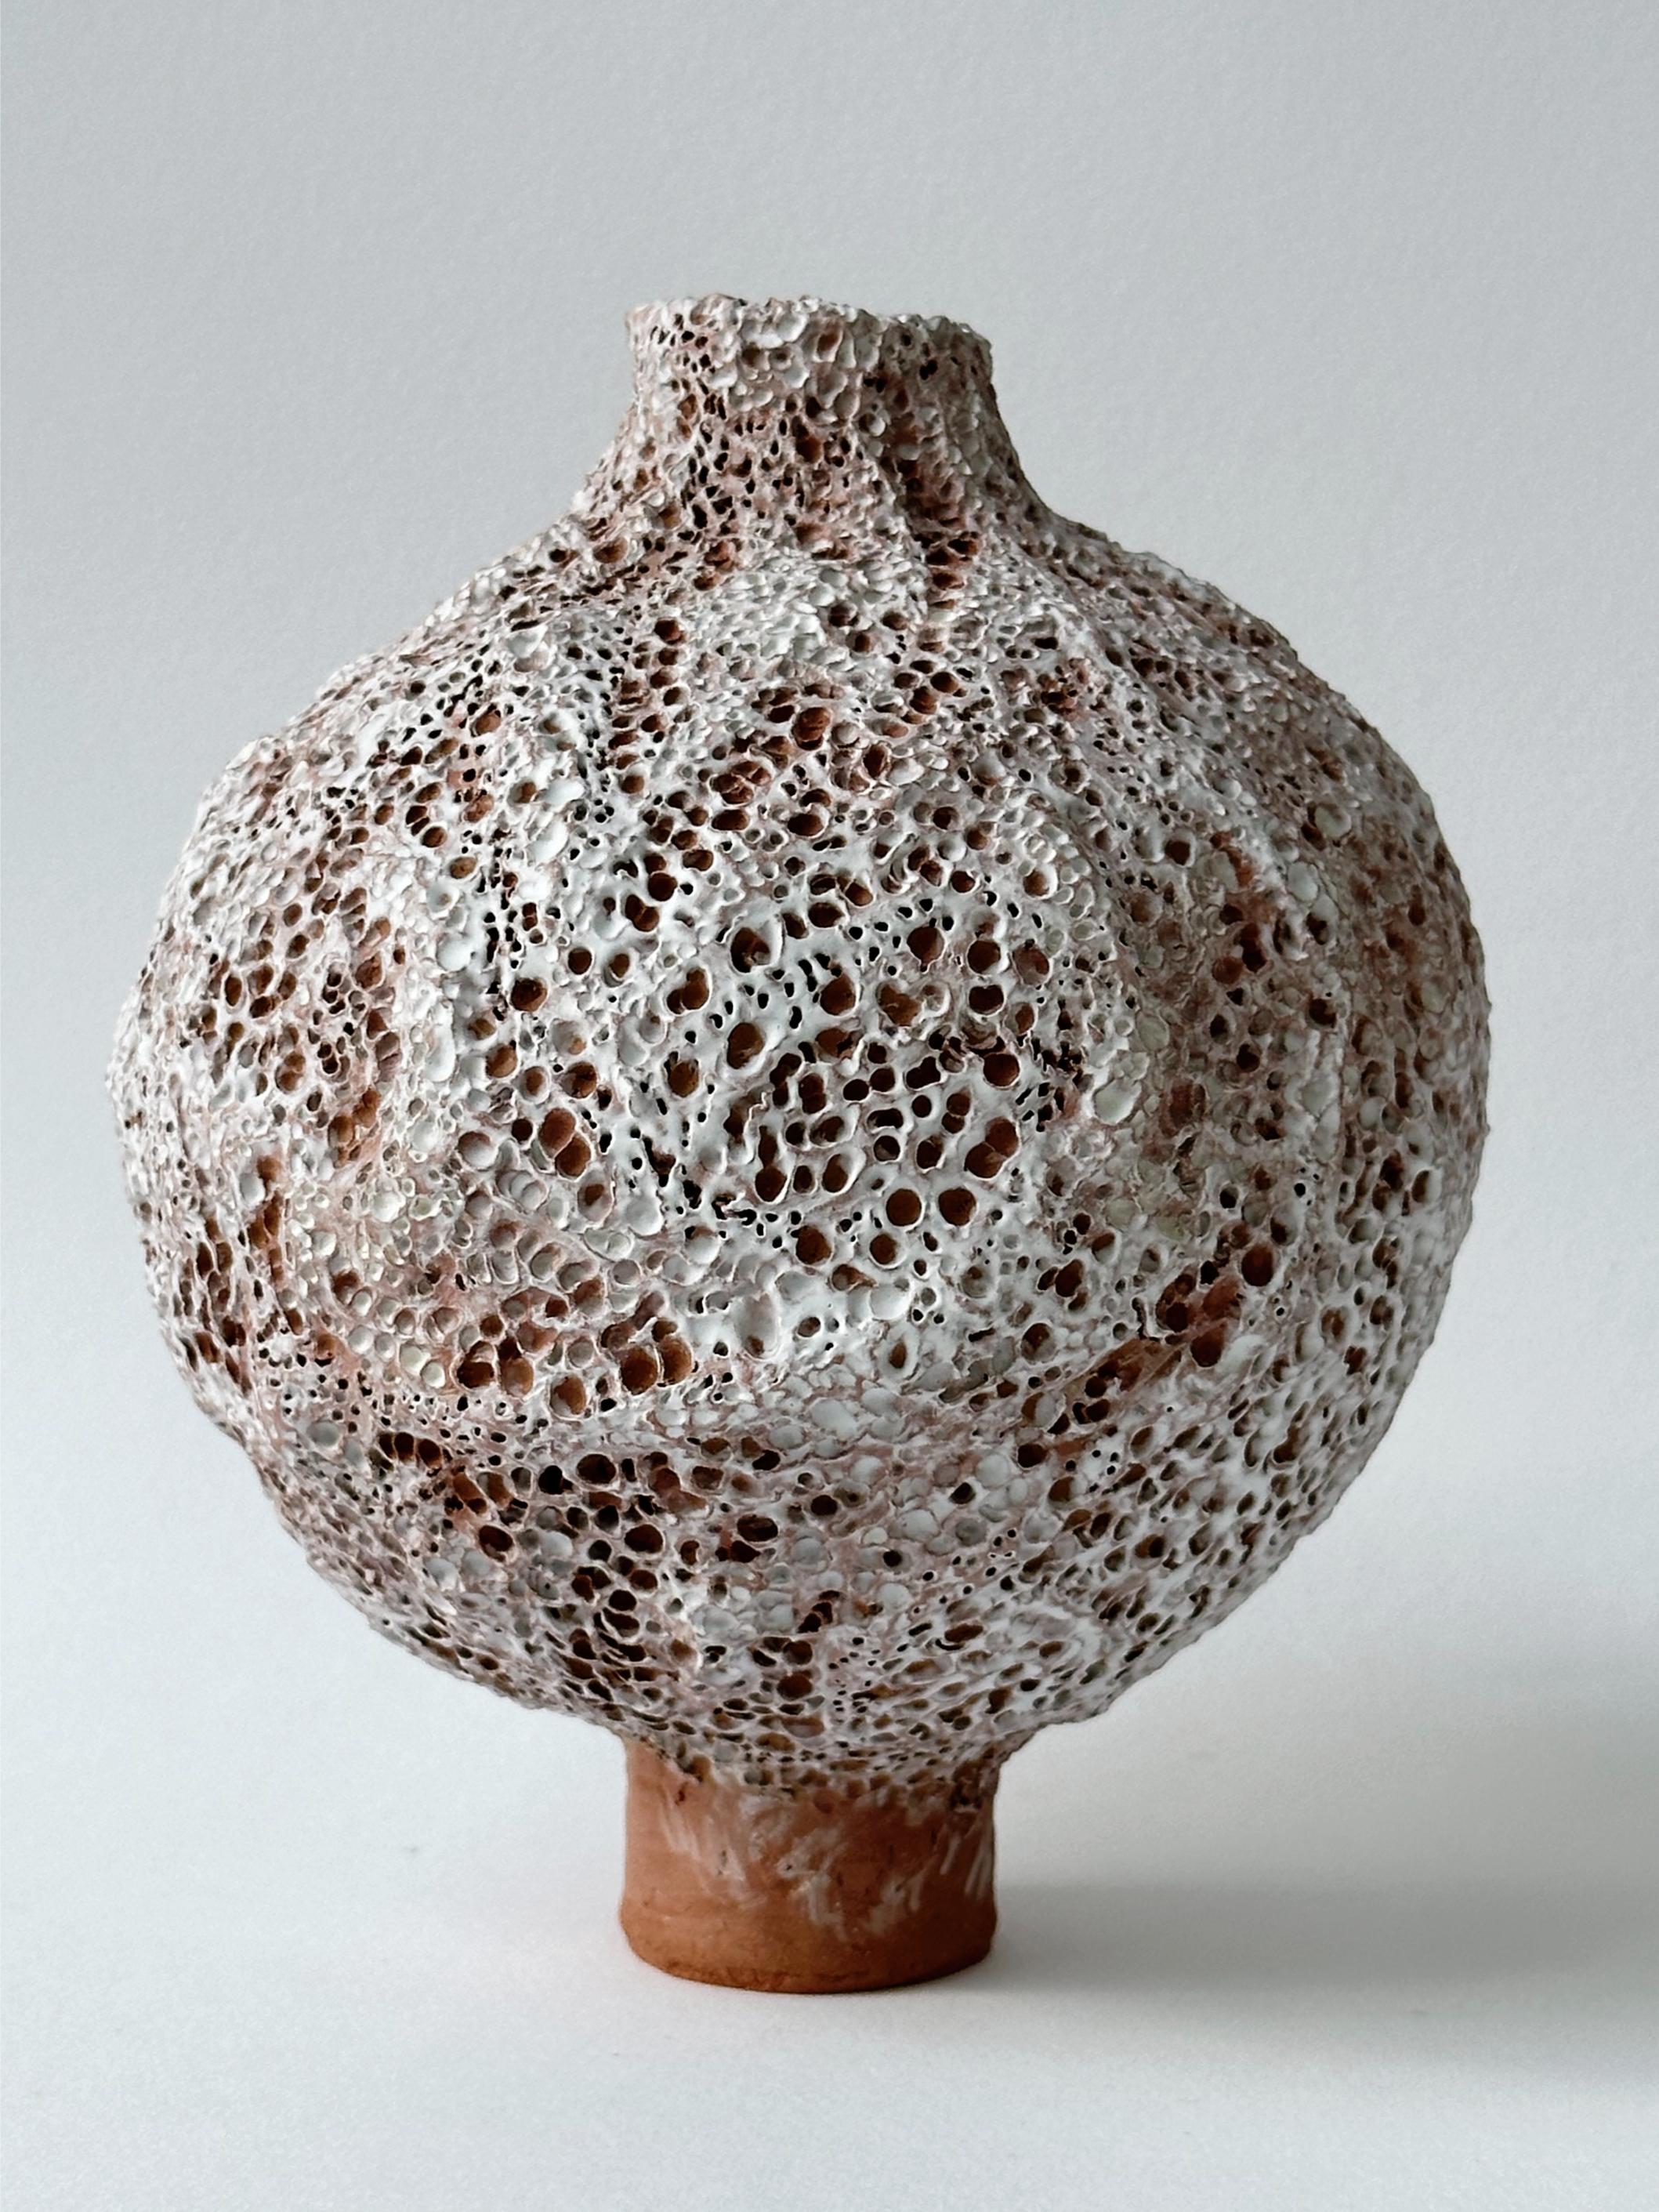 Terracotta Moon Jar No 11 by Elena Vasilantonaki
Unique
Dimensions: ⌀ 14.5 x H 17 cm (Dimensions may vary)
Materials: Local Terracotta Clay from the Island of
Crete

Growing up in Greece I was surrounded by pottery forms that have changed little